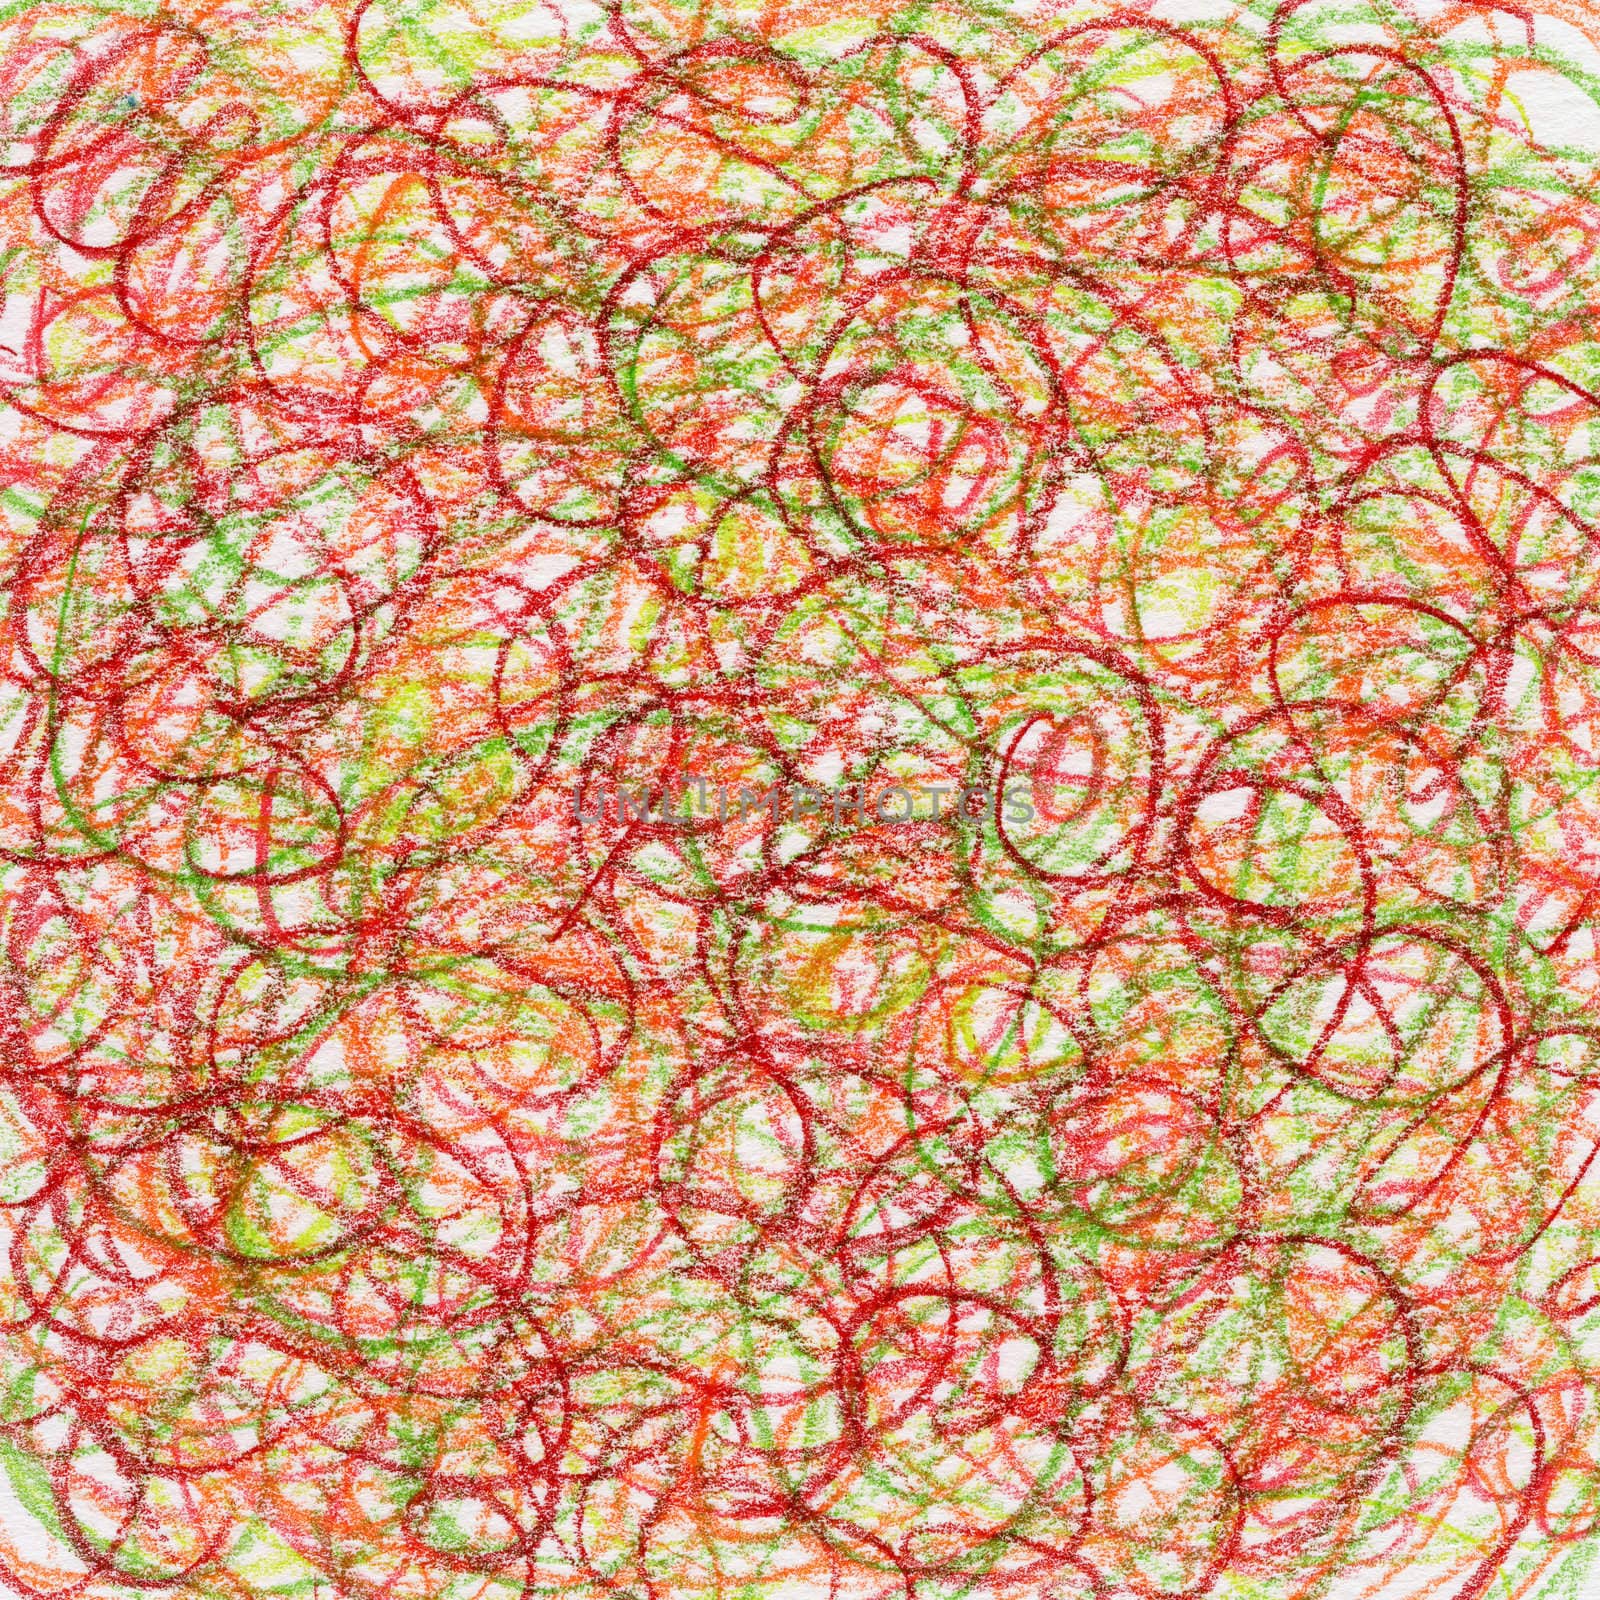 hand-drawn crayon circular scribble background in red, green and orange colors